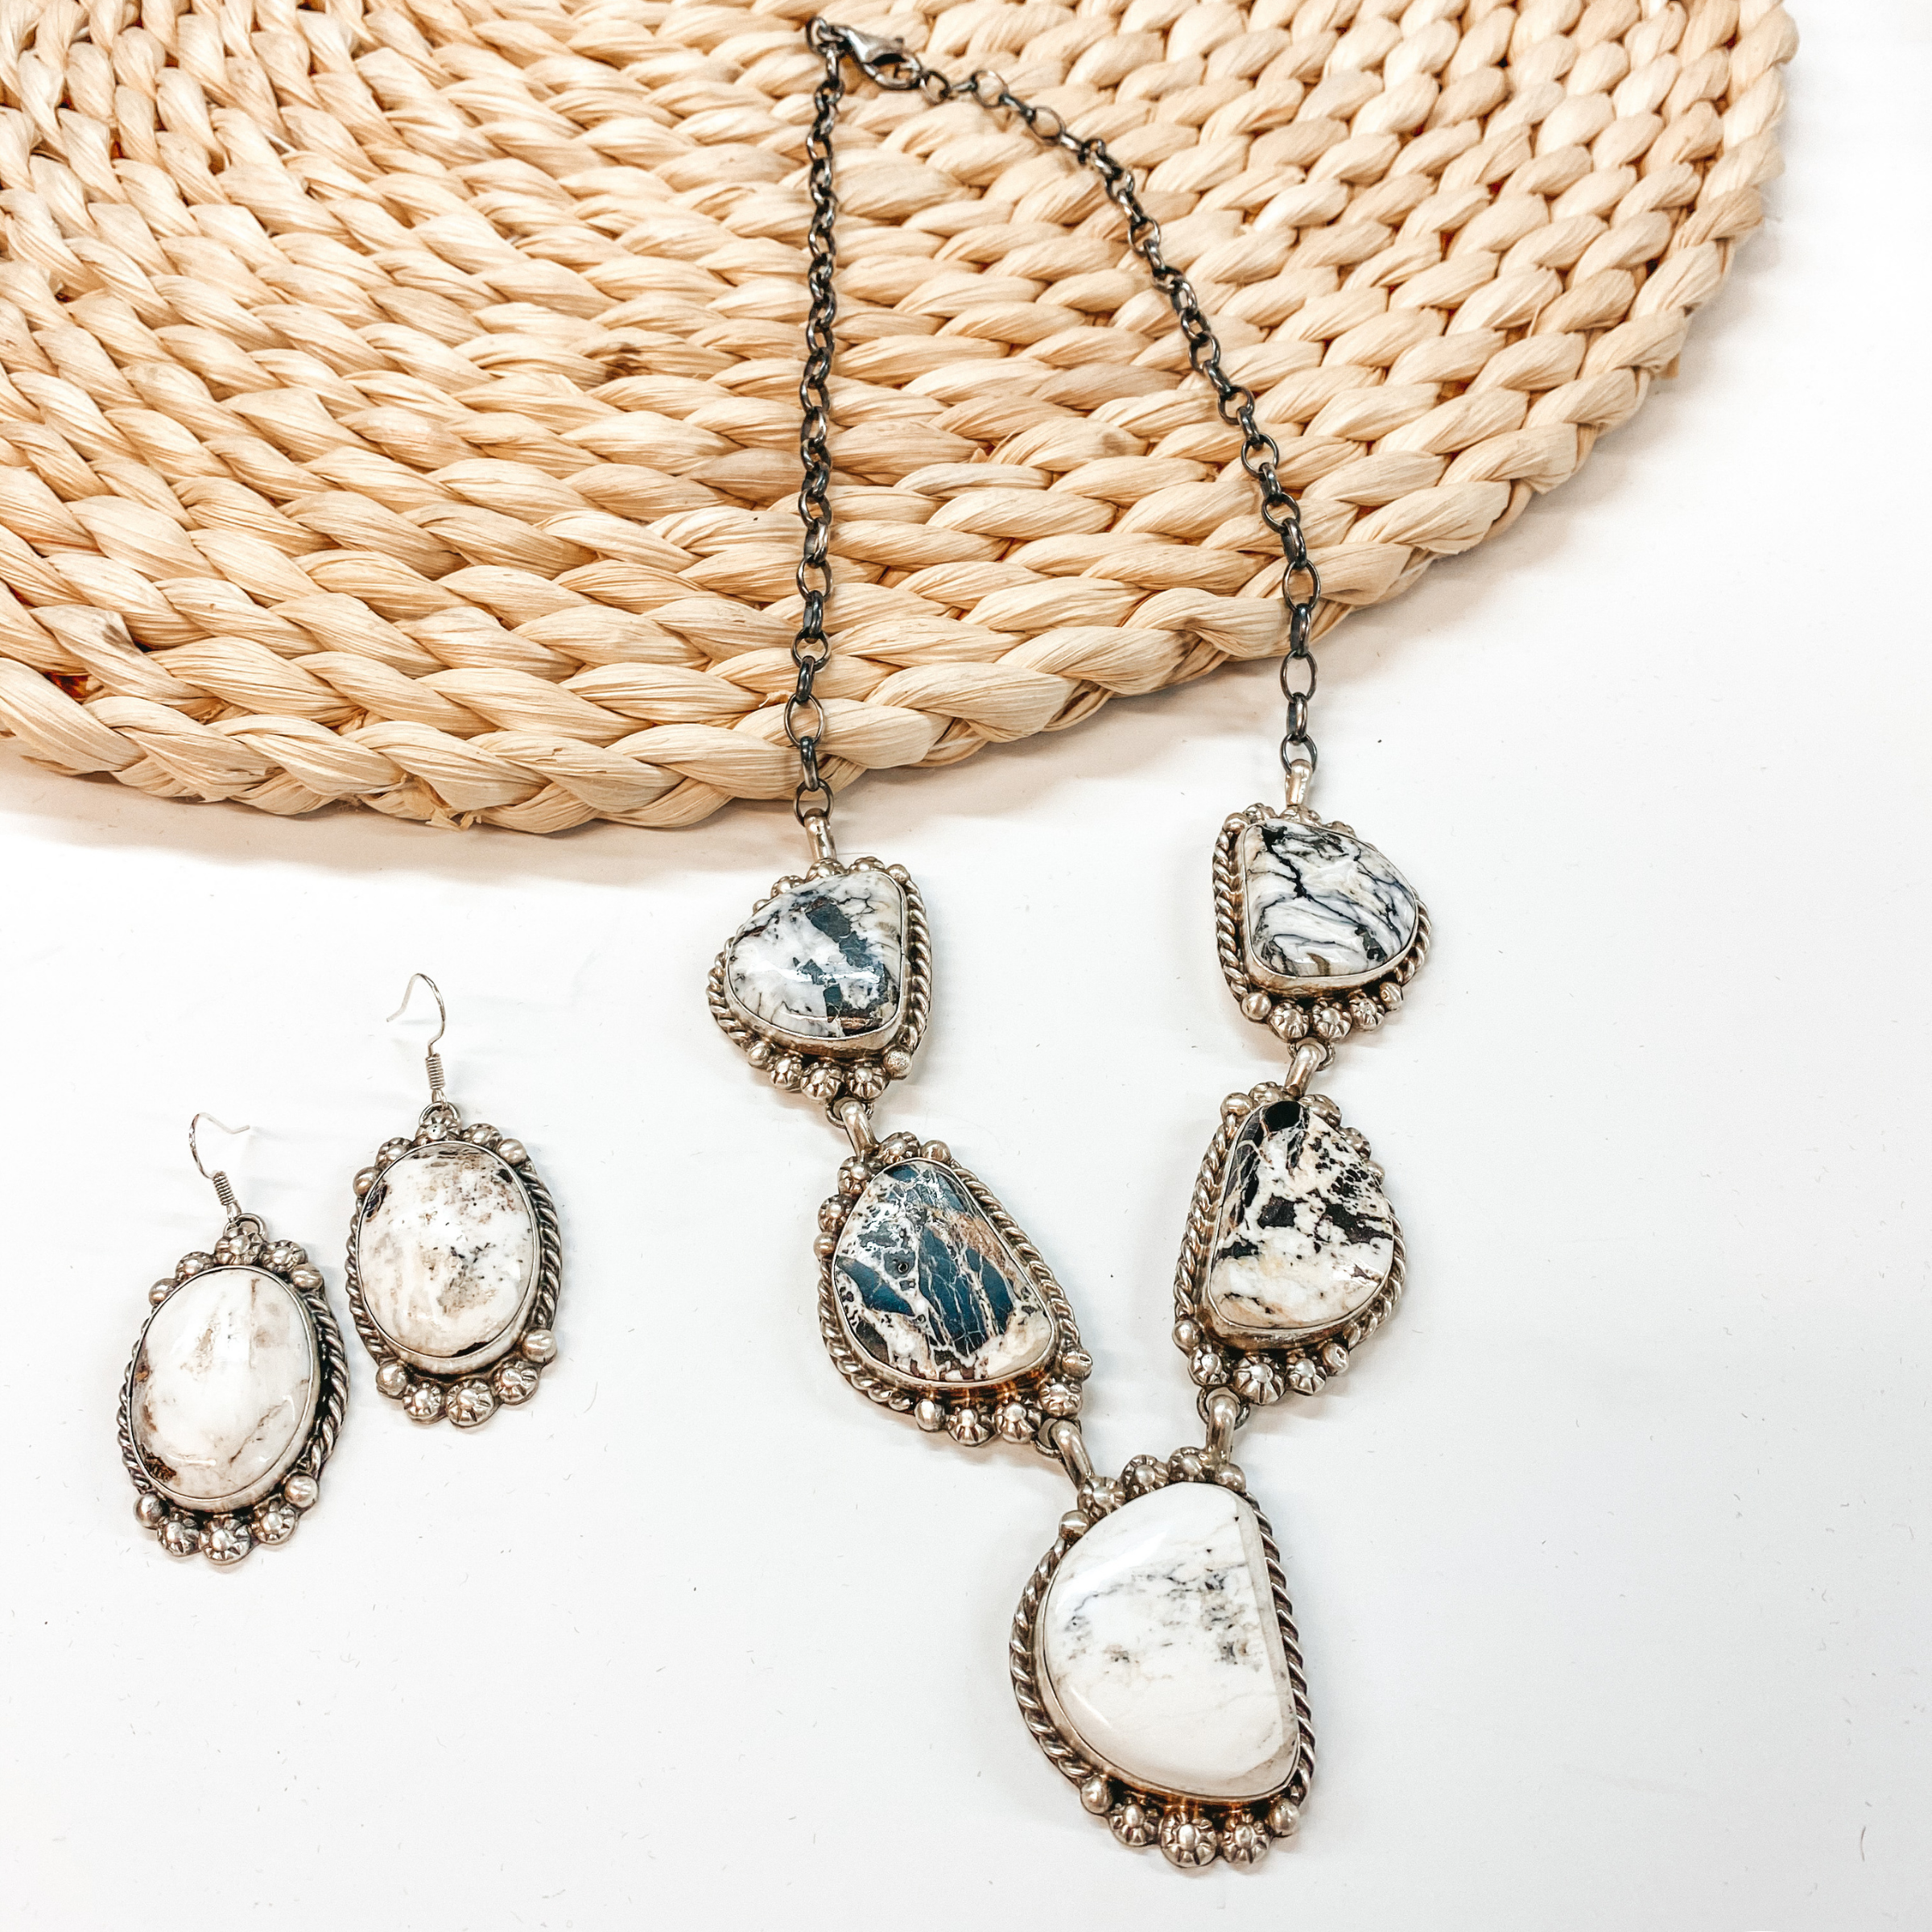 Betta Lee | Navajo Handmade Sterling Silver & White Buffalo Lariat Necklace + Matching Earrings - Giddy Up Glamour Boutique